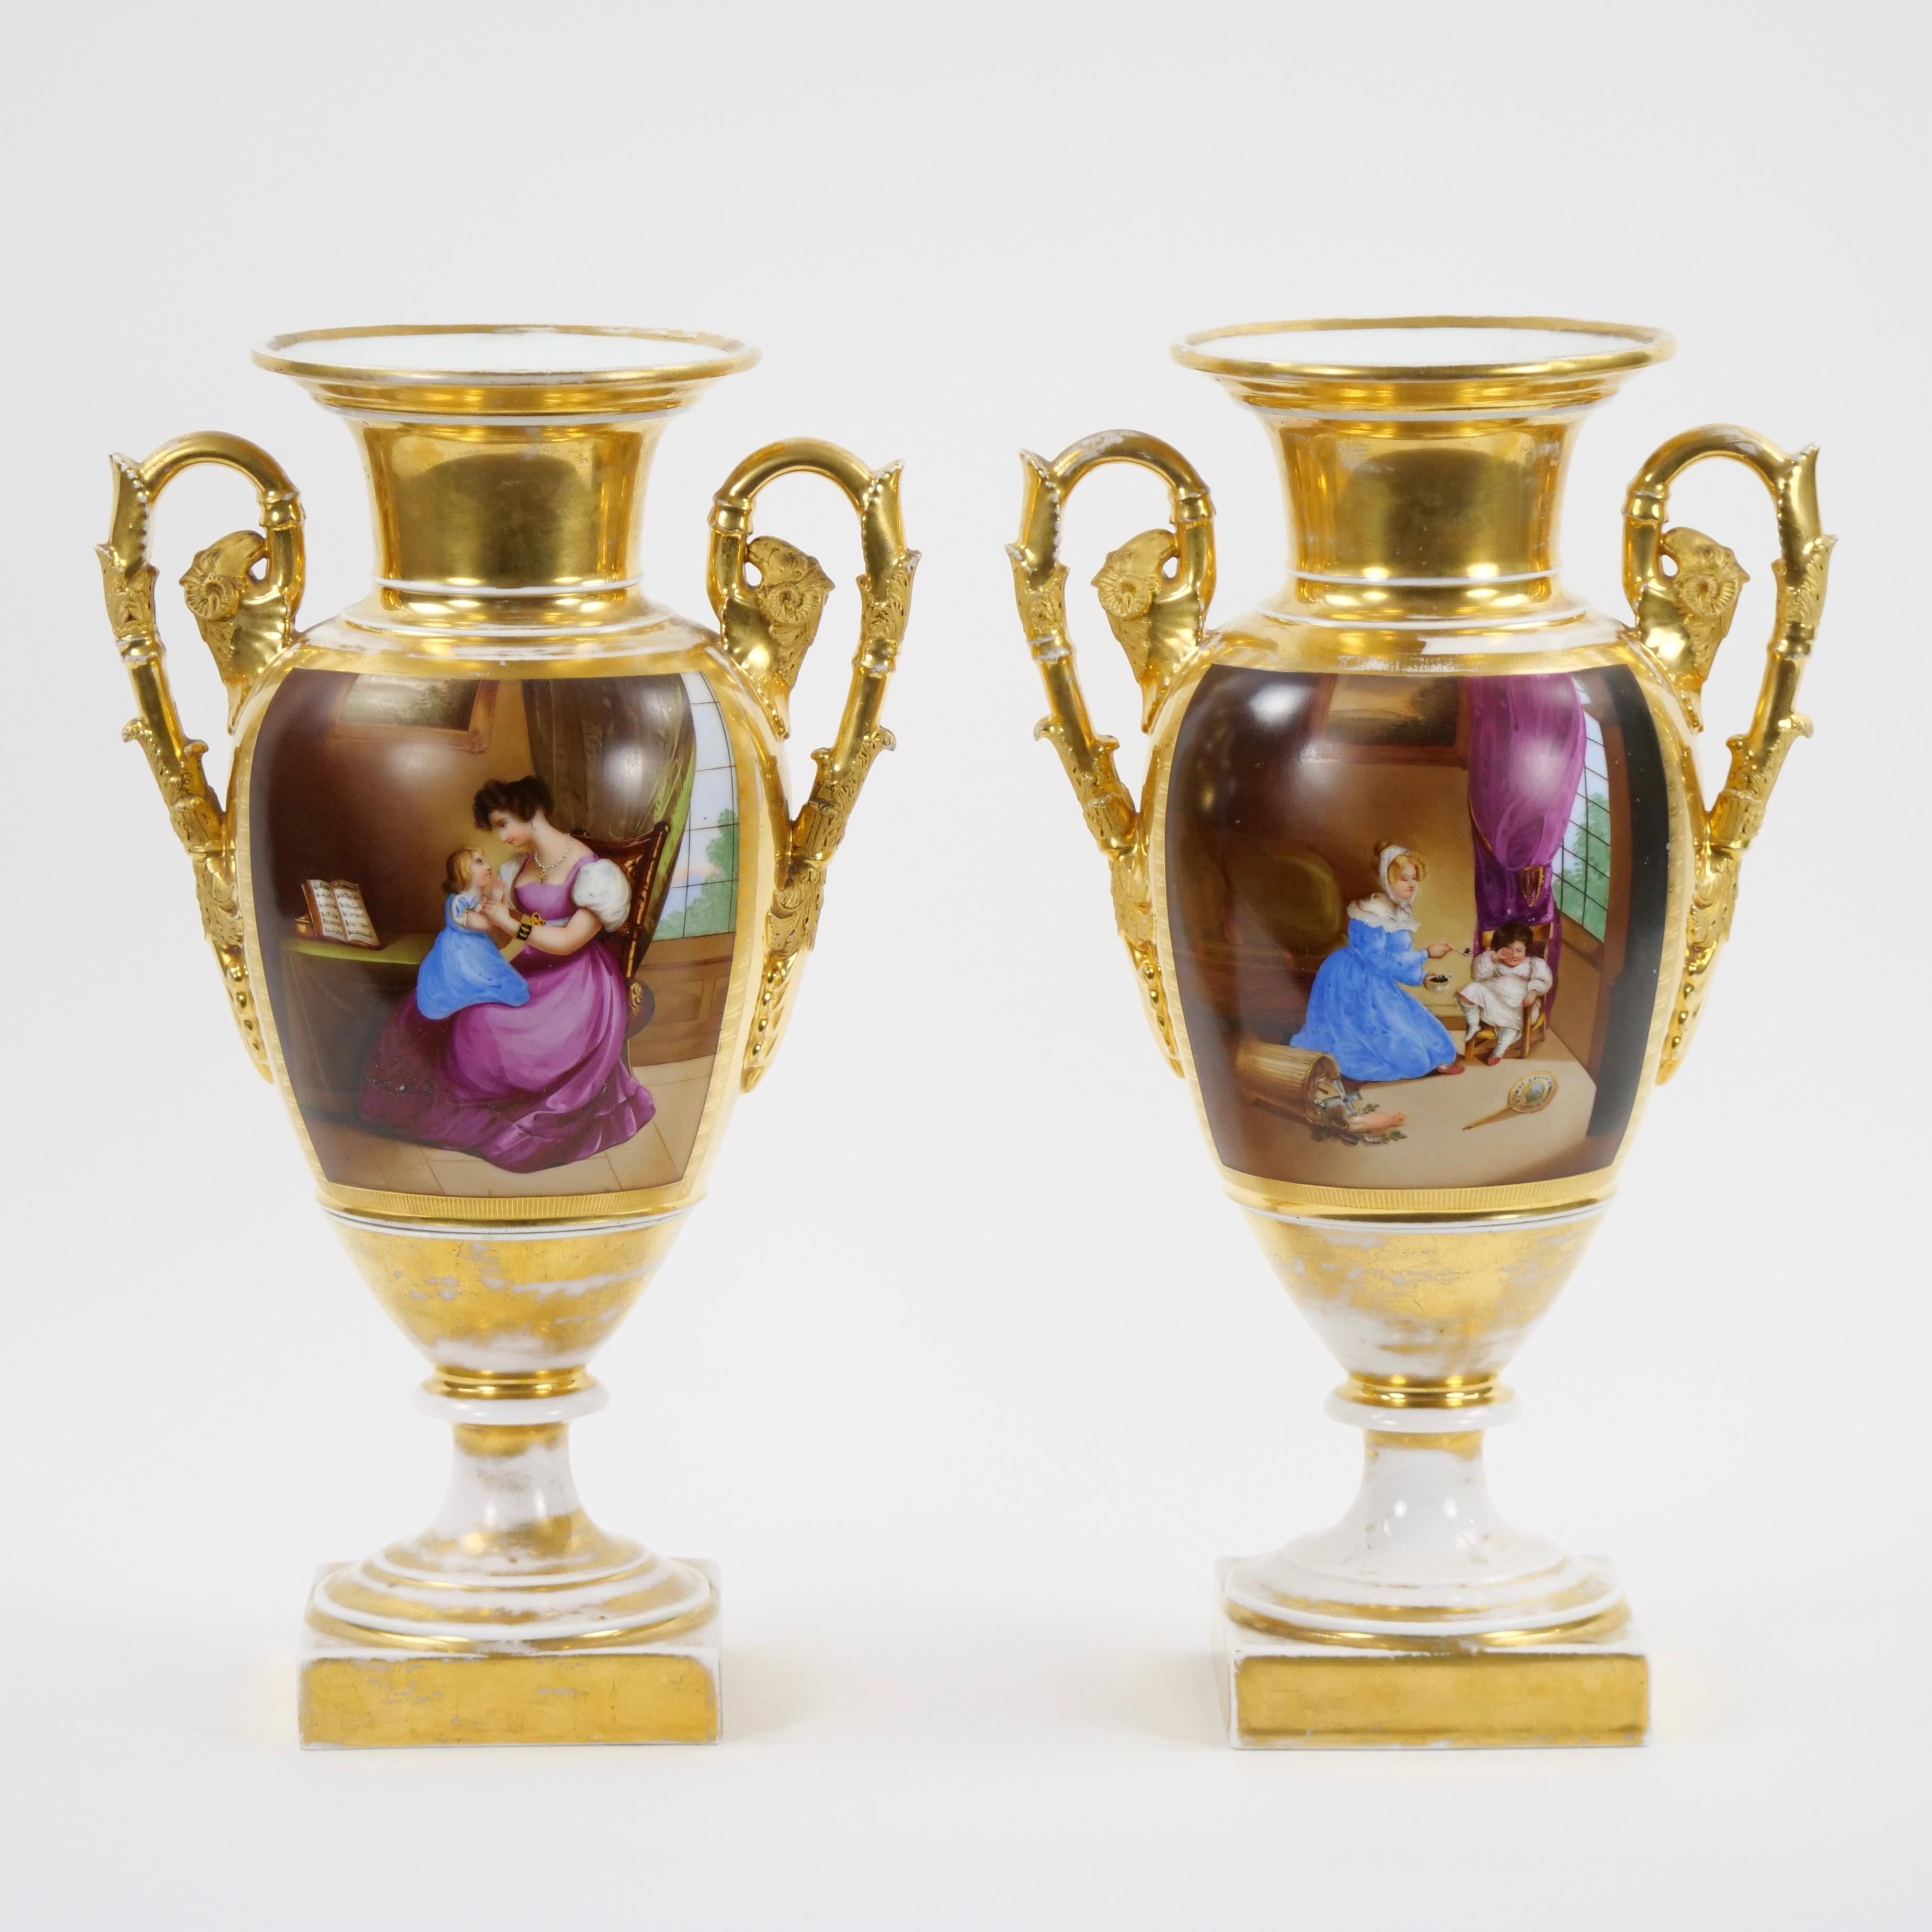 Discover the timeless elegance of a pair of 19th-century Paris porcelain vases, meticulously adorned with exquisite gilt and hand-painted decorations. These vases encapsulate the epitome of artistic craftsmanship and historical charm, transporting